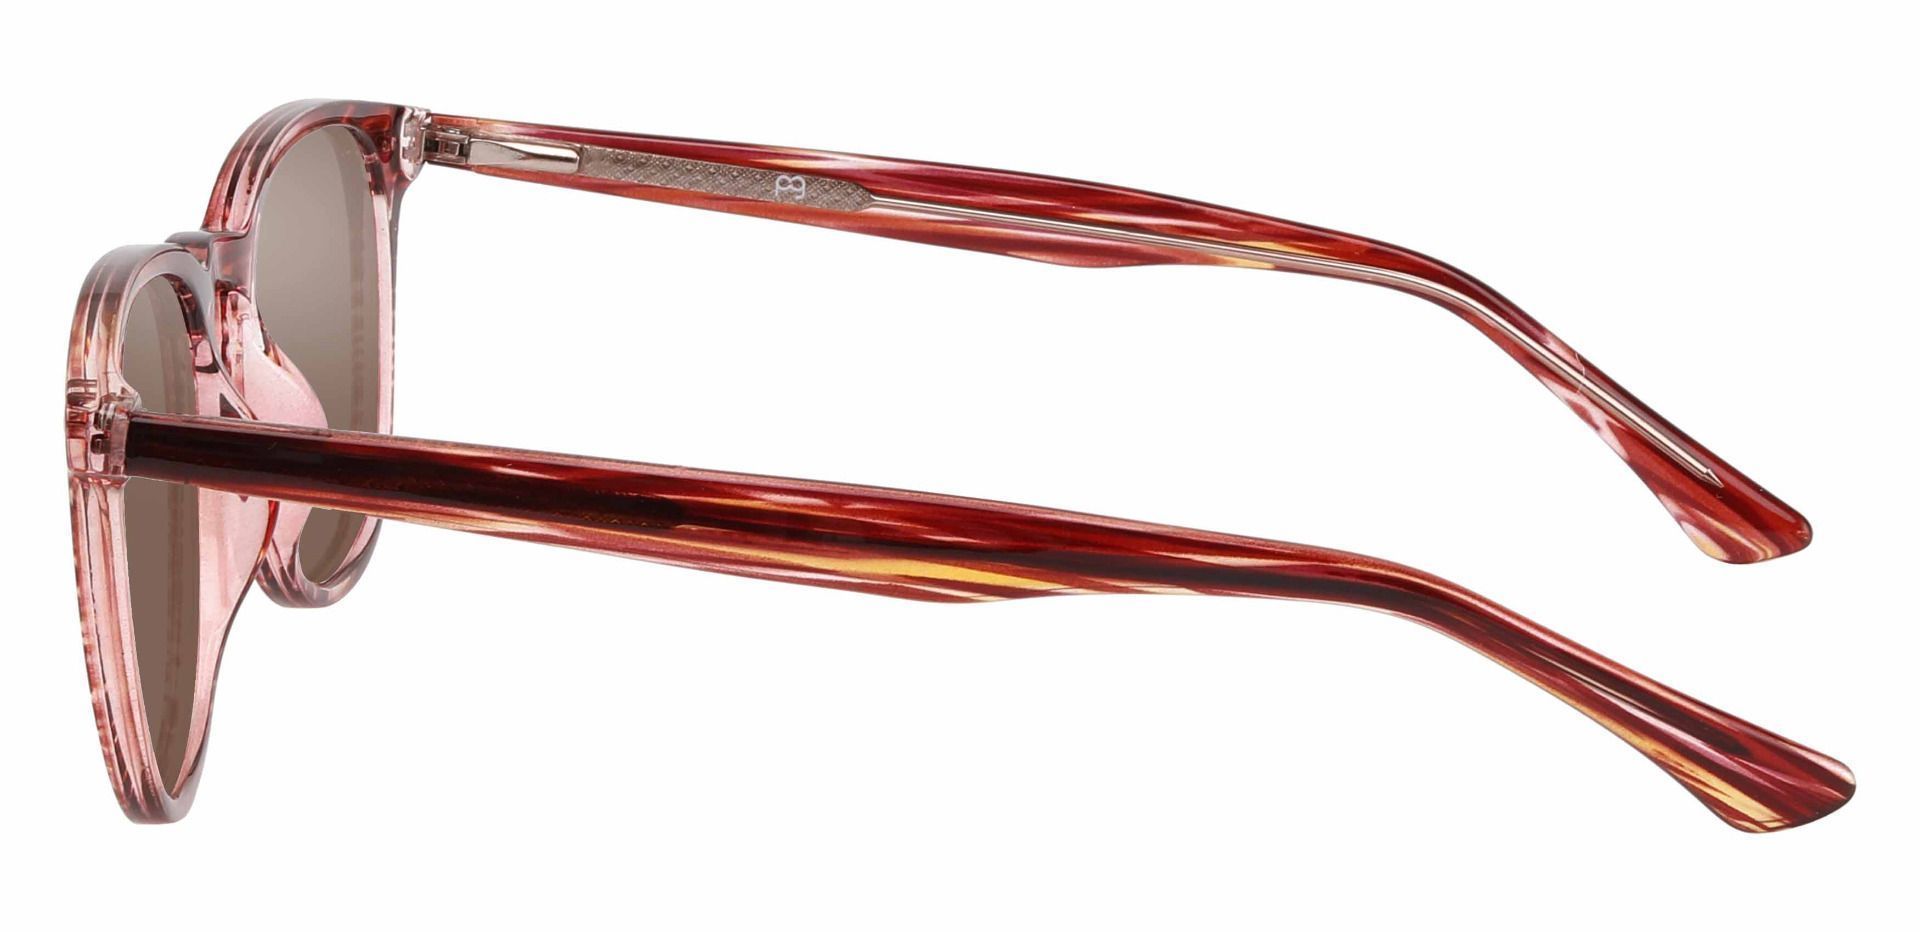 Sycamore Oval Progressive Sunglasses - Red Frame With Brown Lenses